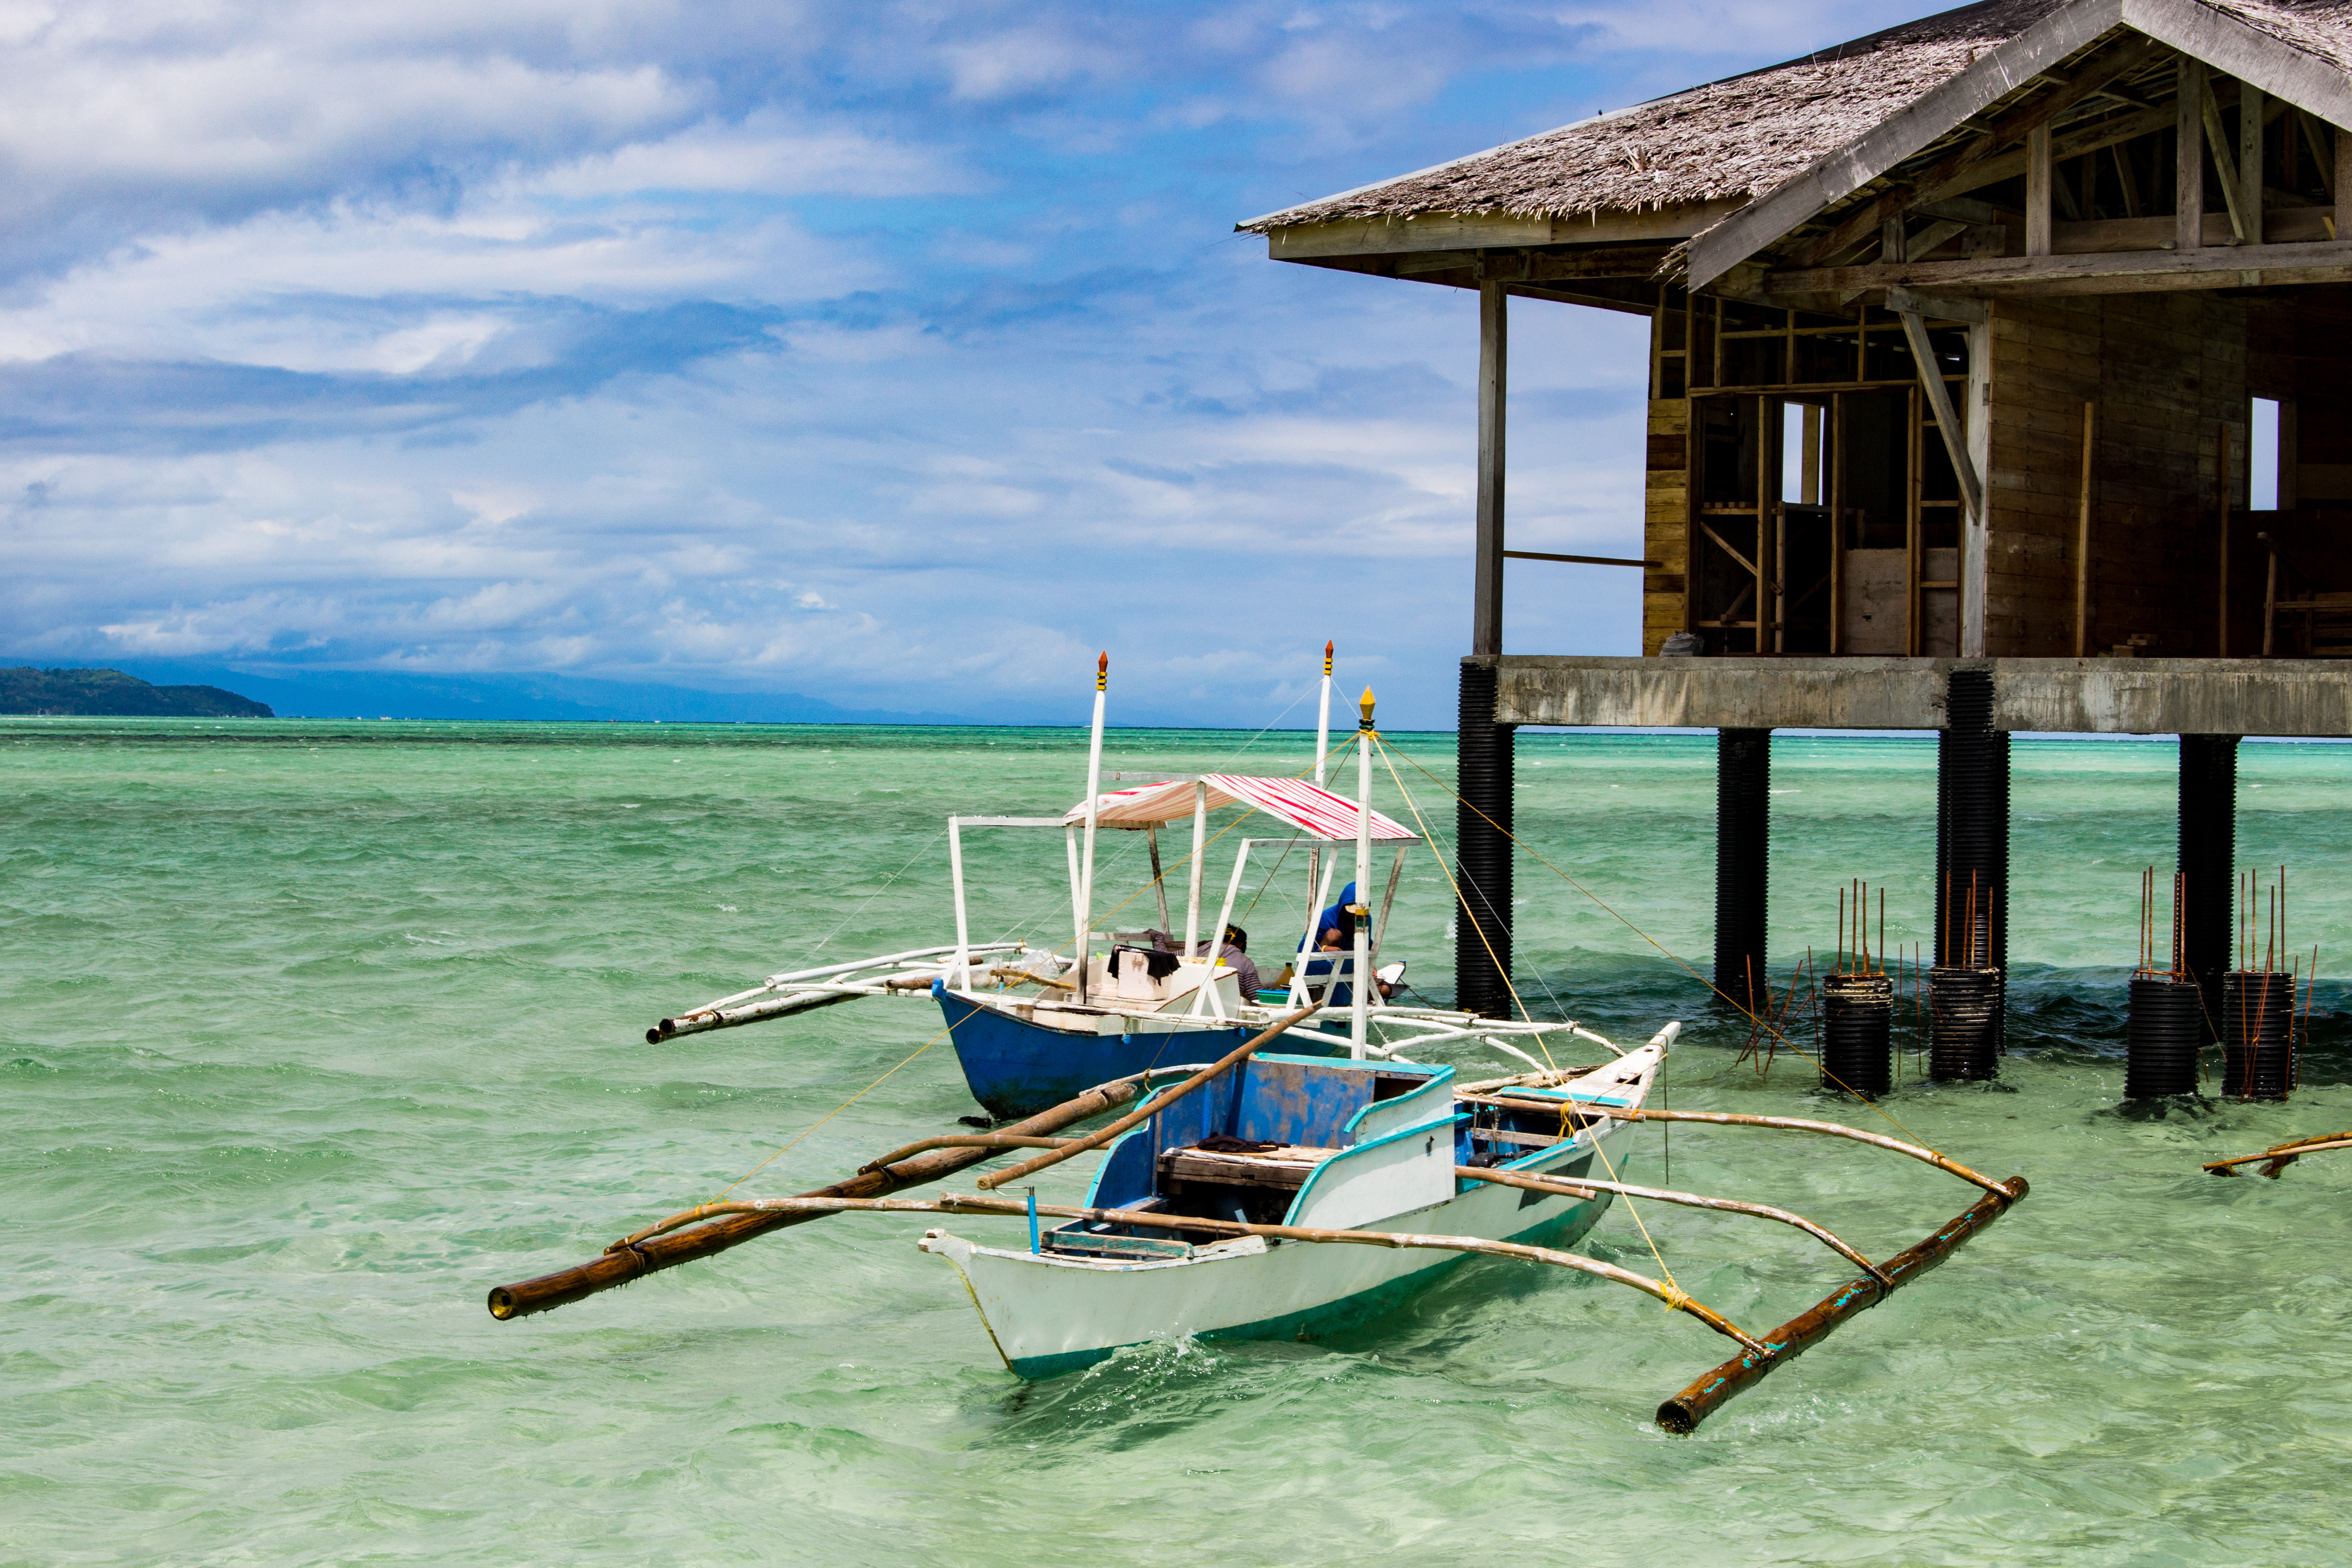 Traditional wooden boat next to hut on stilts over crystal clear water in Negros, Philippines. 